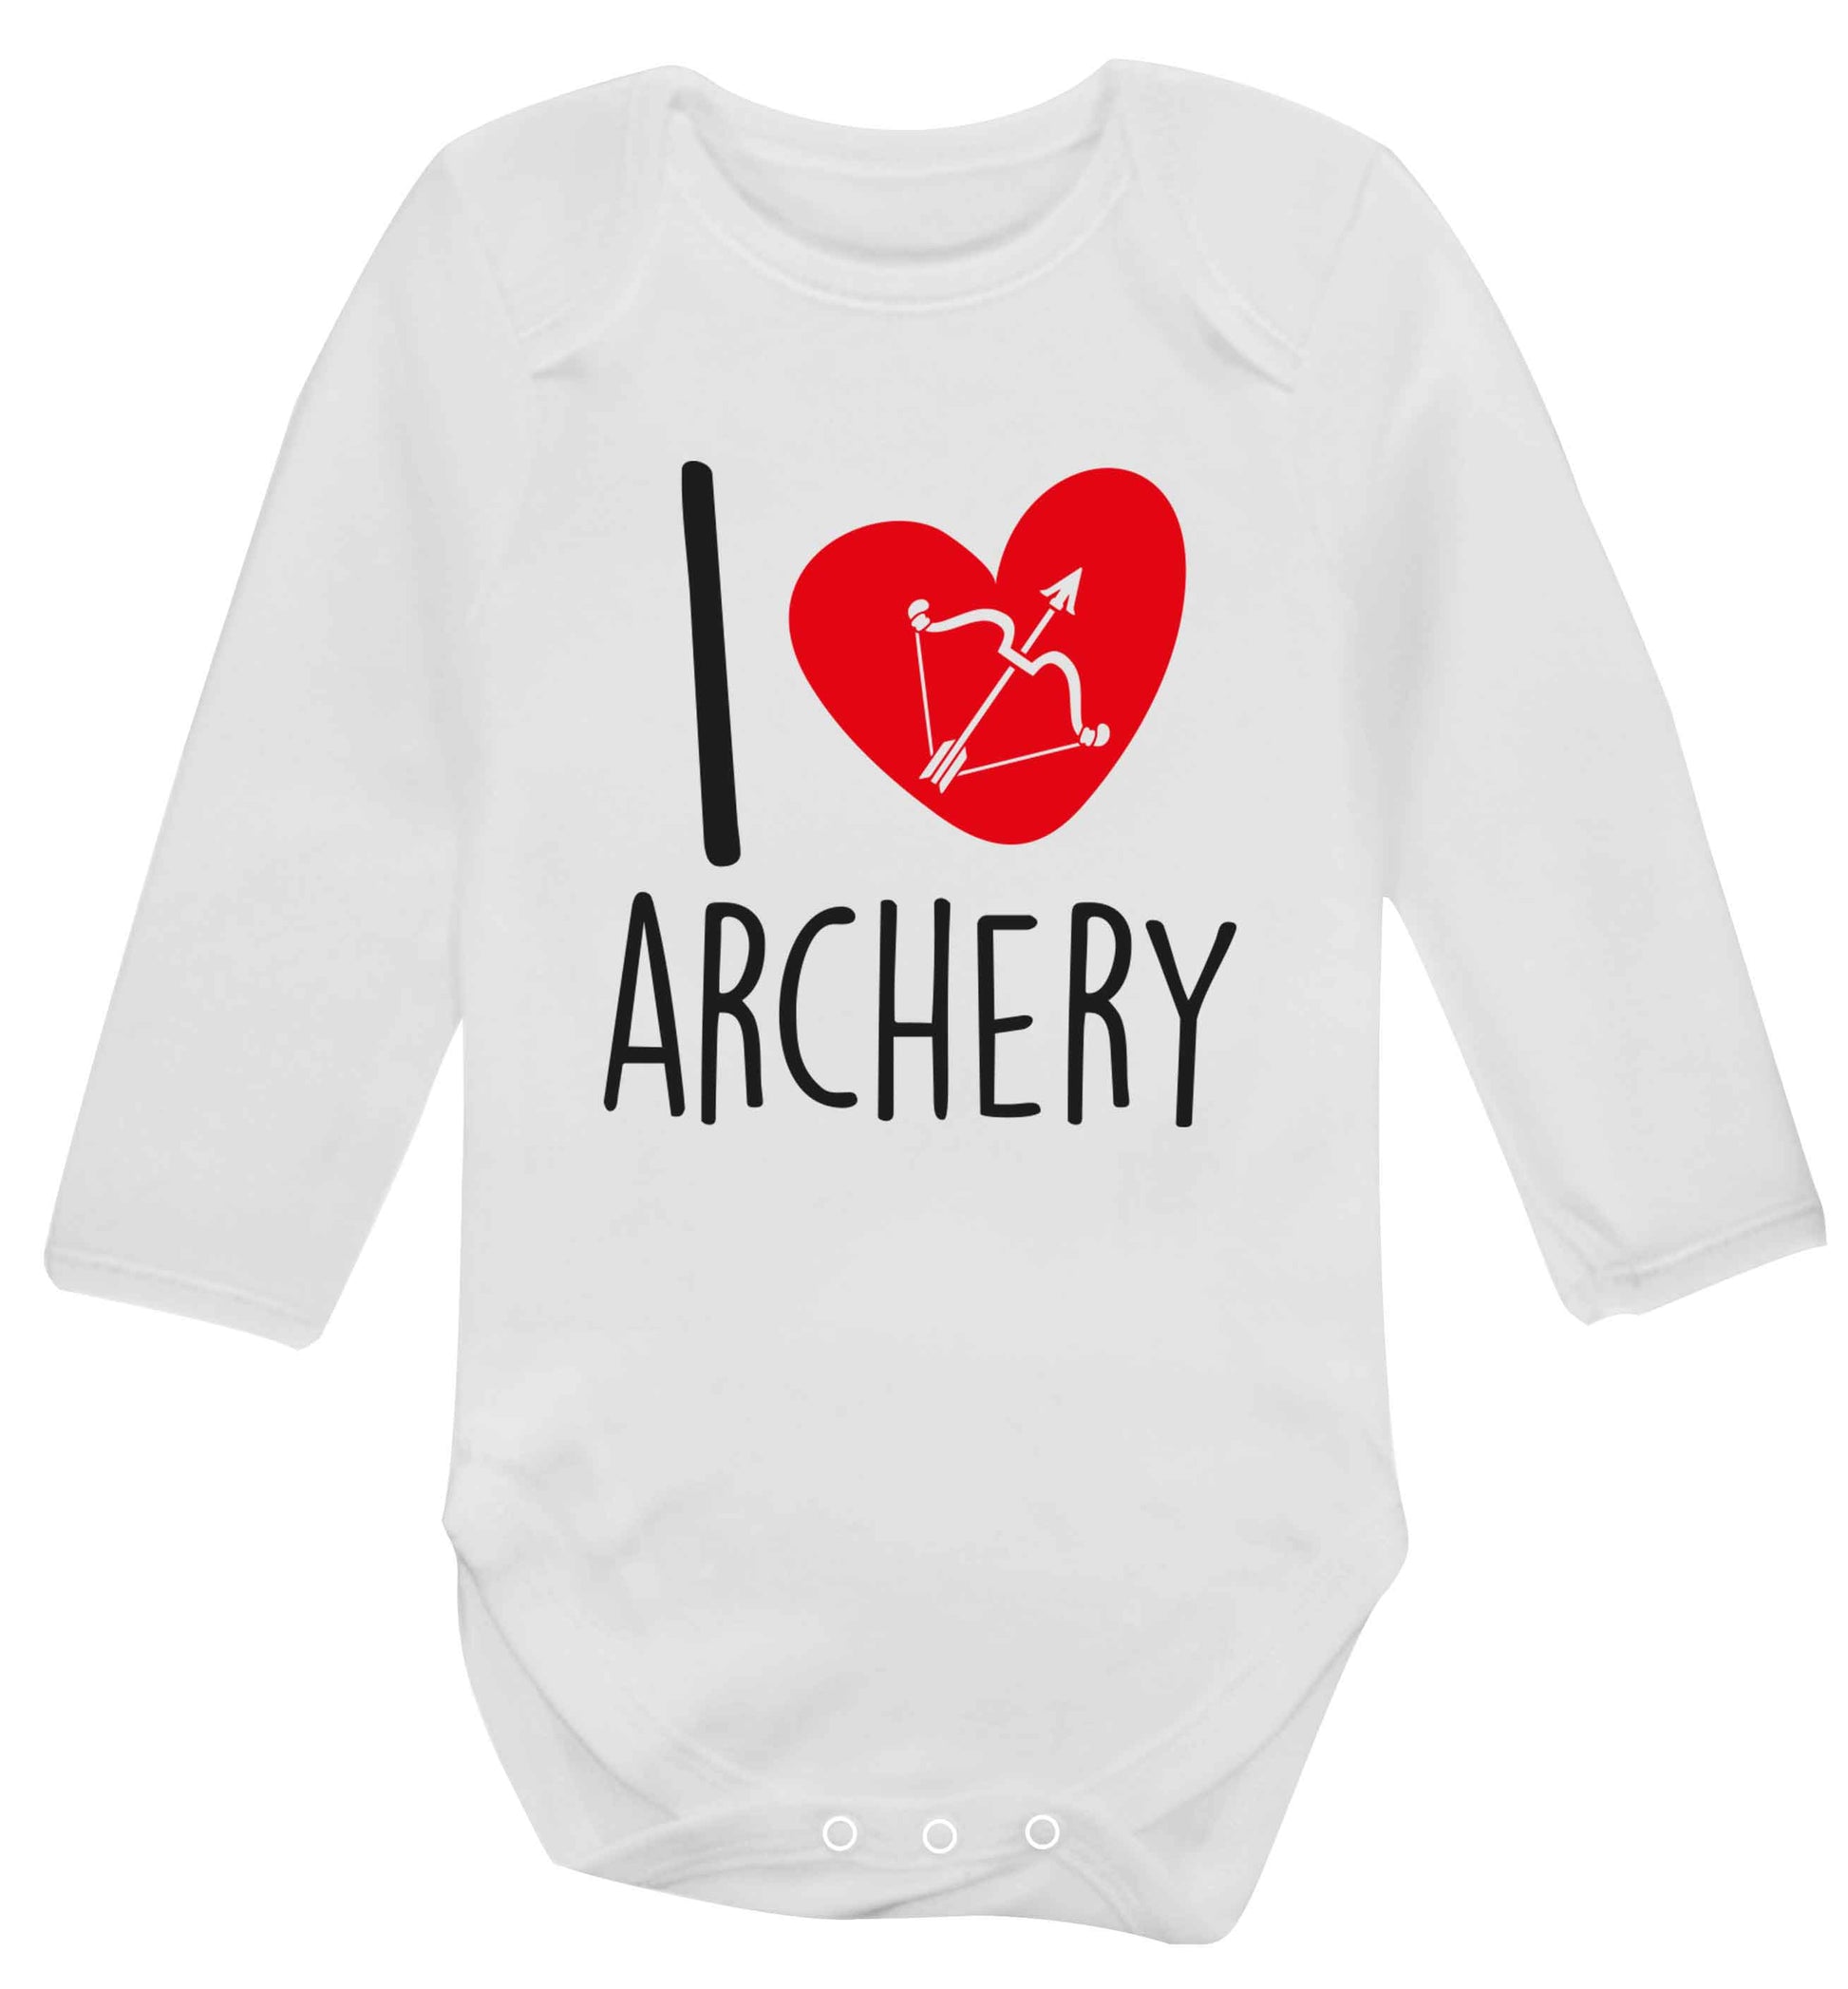 I love archery Baby Vest long sleeved white 6-12 months